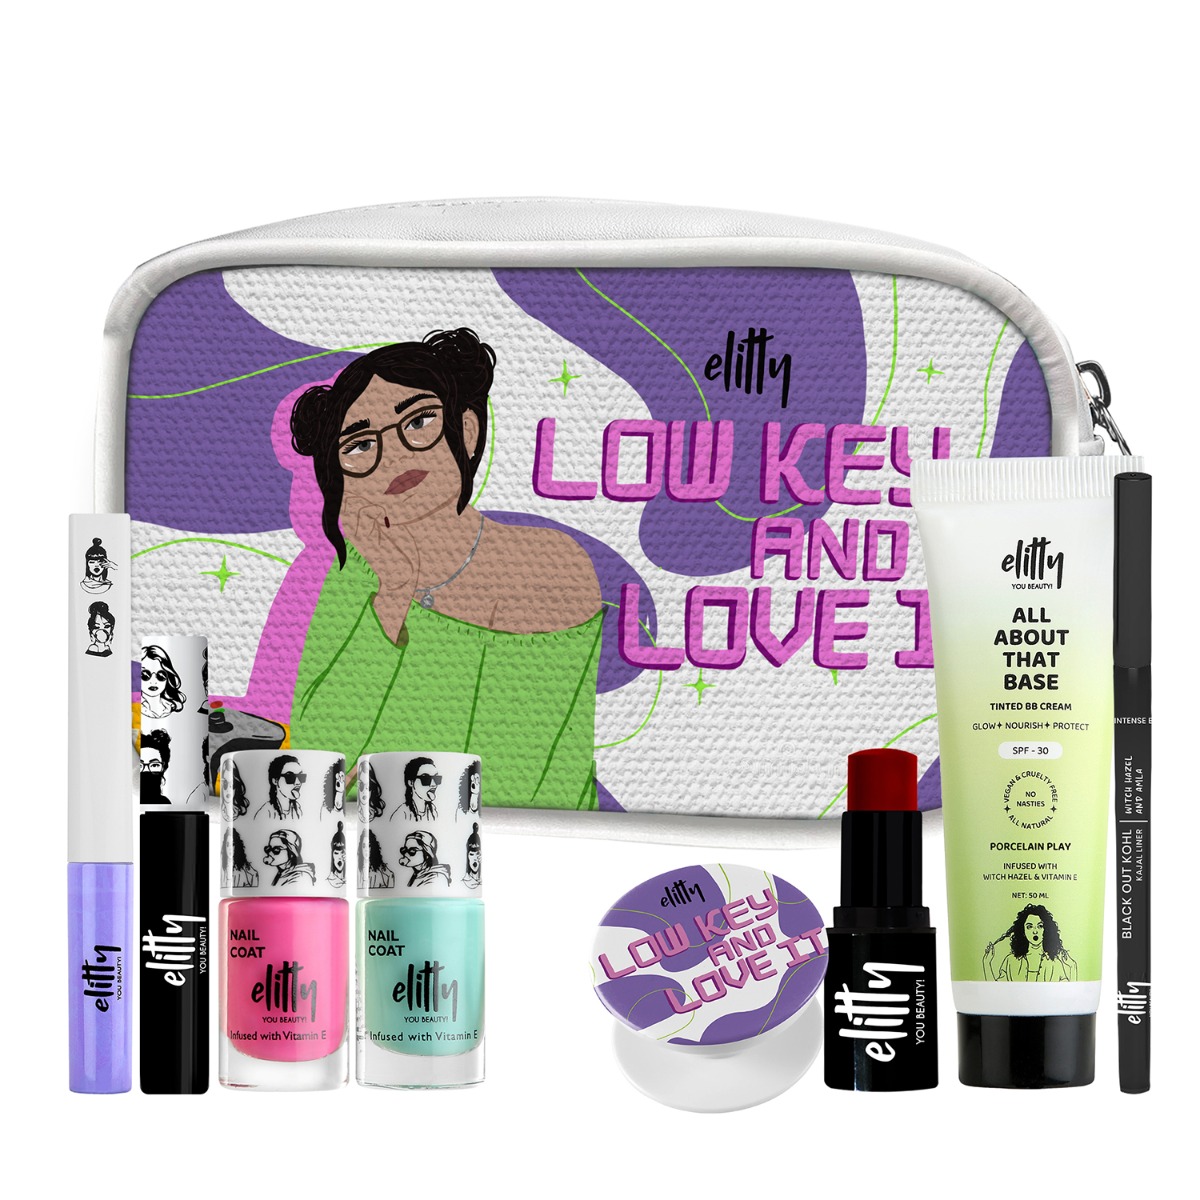 Elitty Low Key And Love It Kit (Light) - Complete Makeup Kit For Teens, Kit